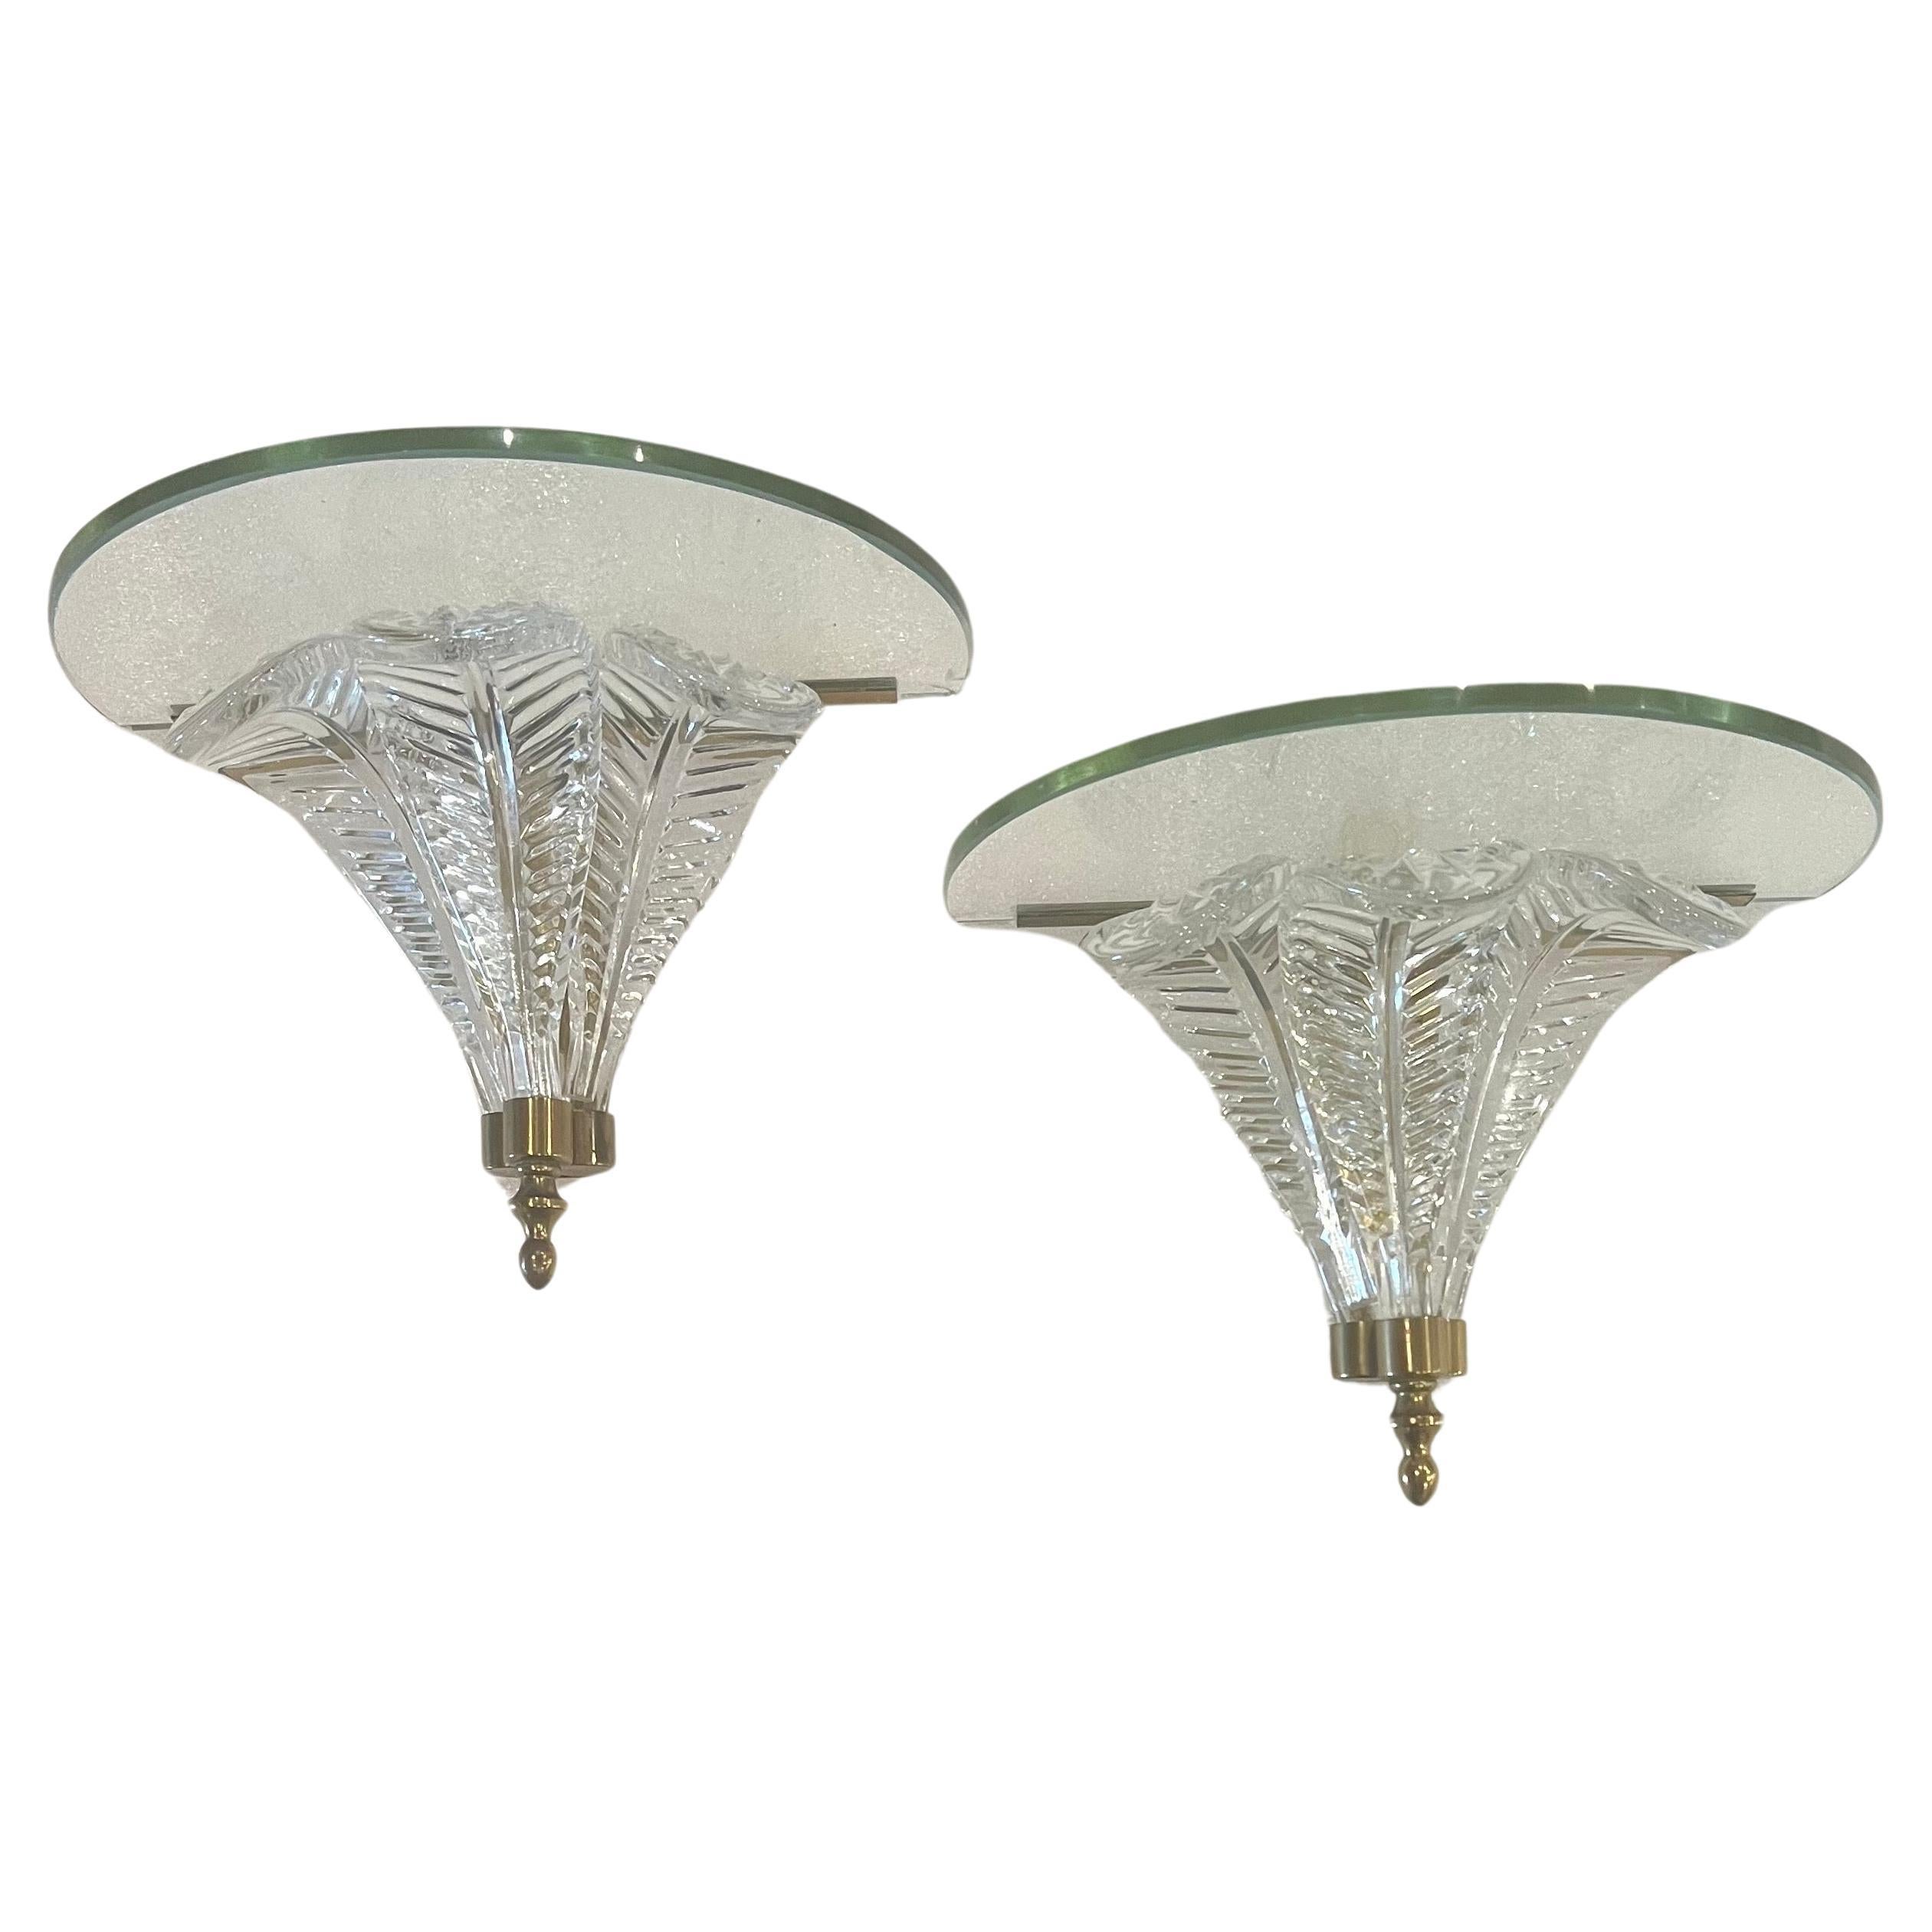 Elegant pair of wall sconces shelves with brass accents petite size beautiful elegant, circa 1970's made in Italy, nice condition small corner chip in one corner on one shelf hard to notice but needs to be mentioned. Sold AS/IS.